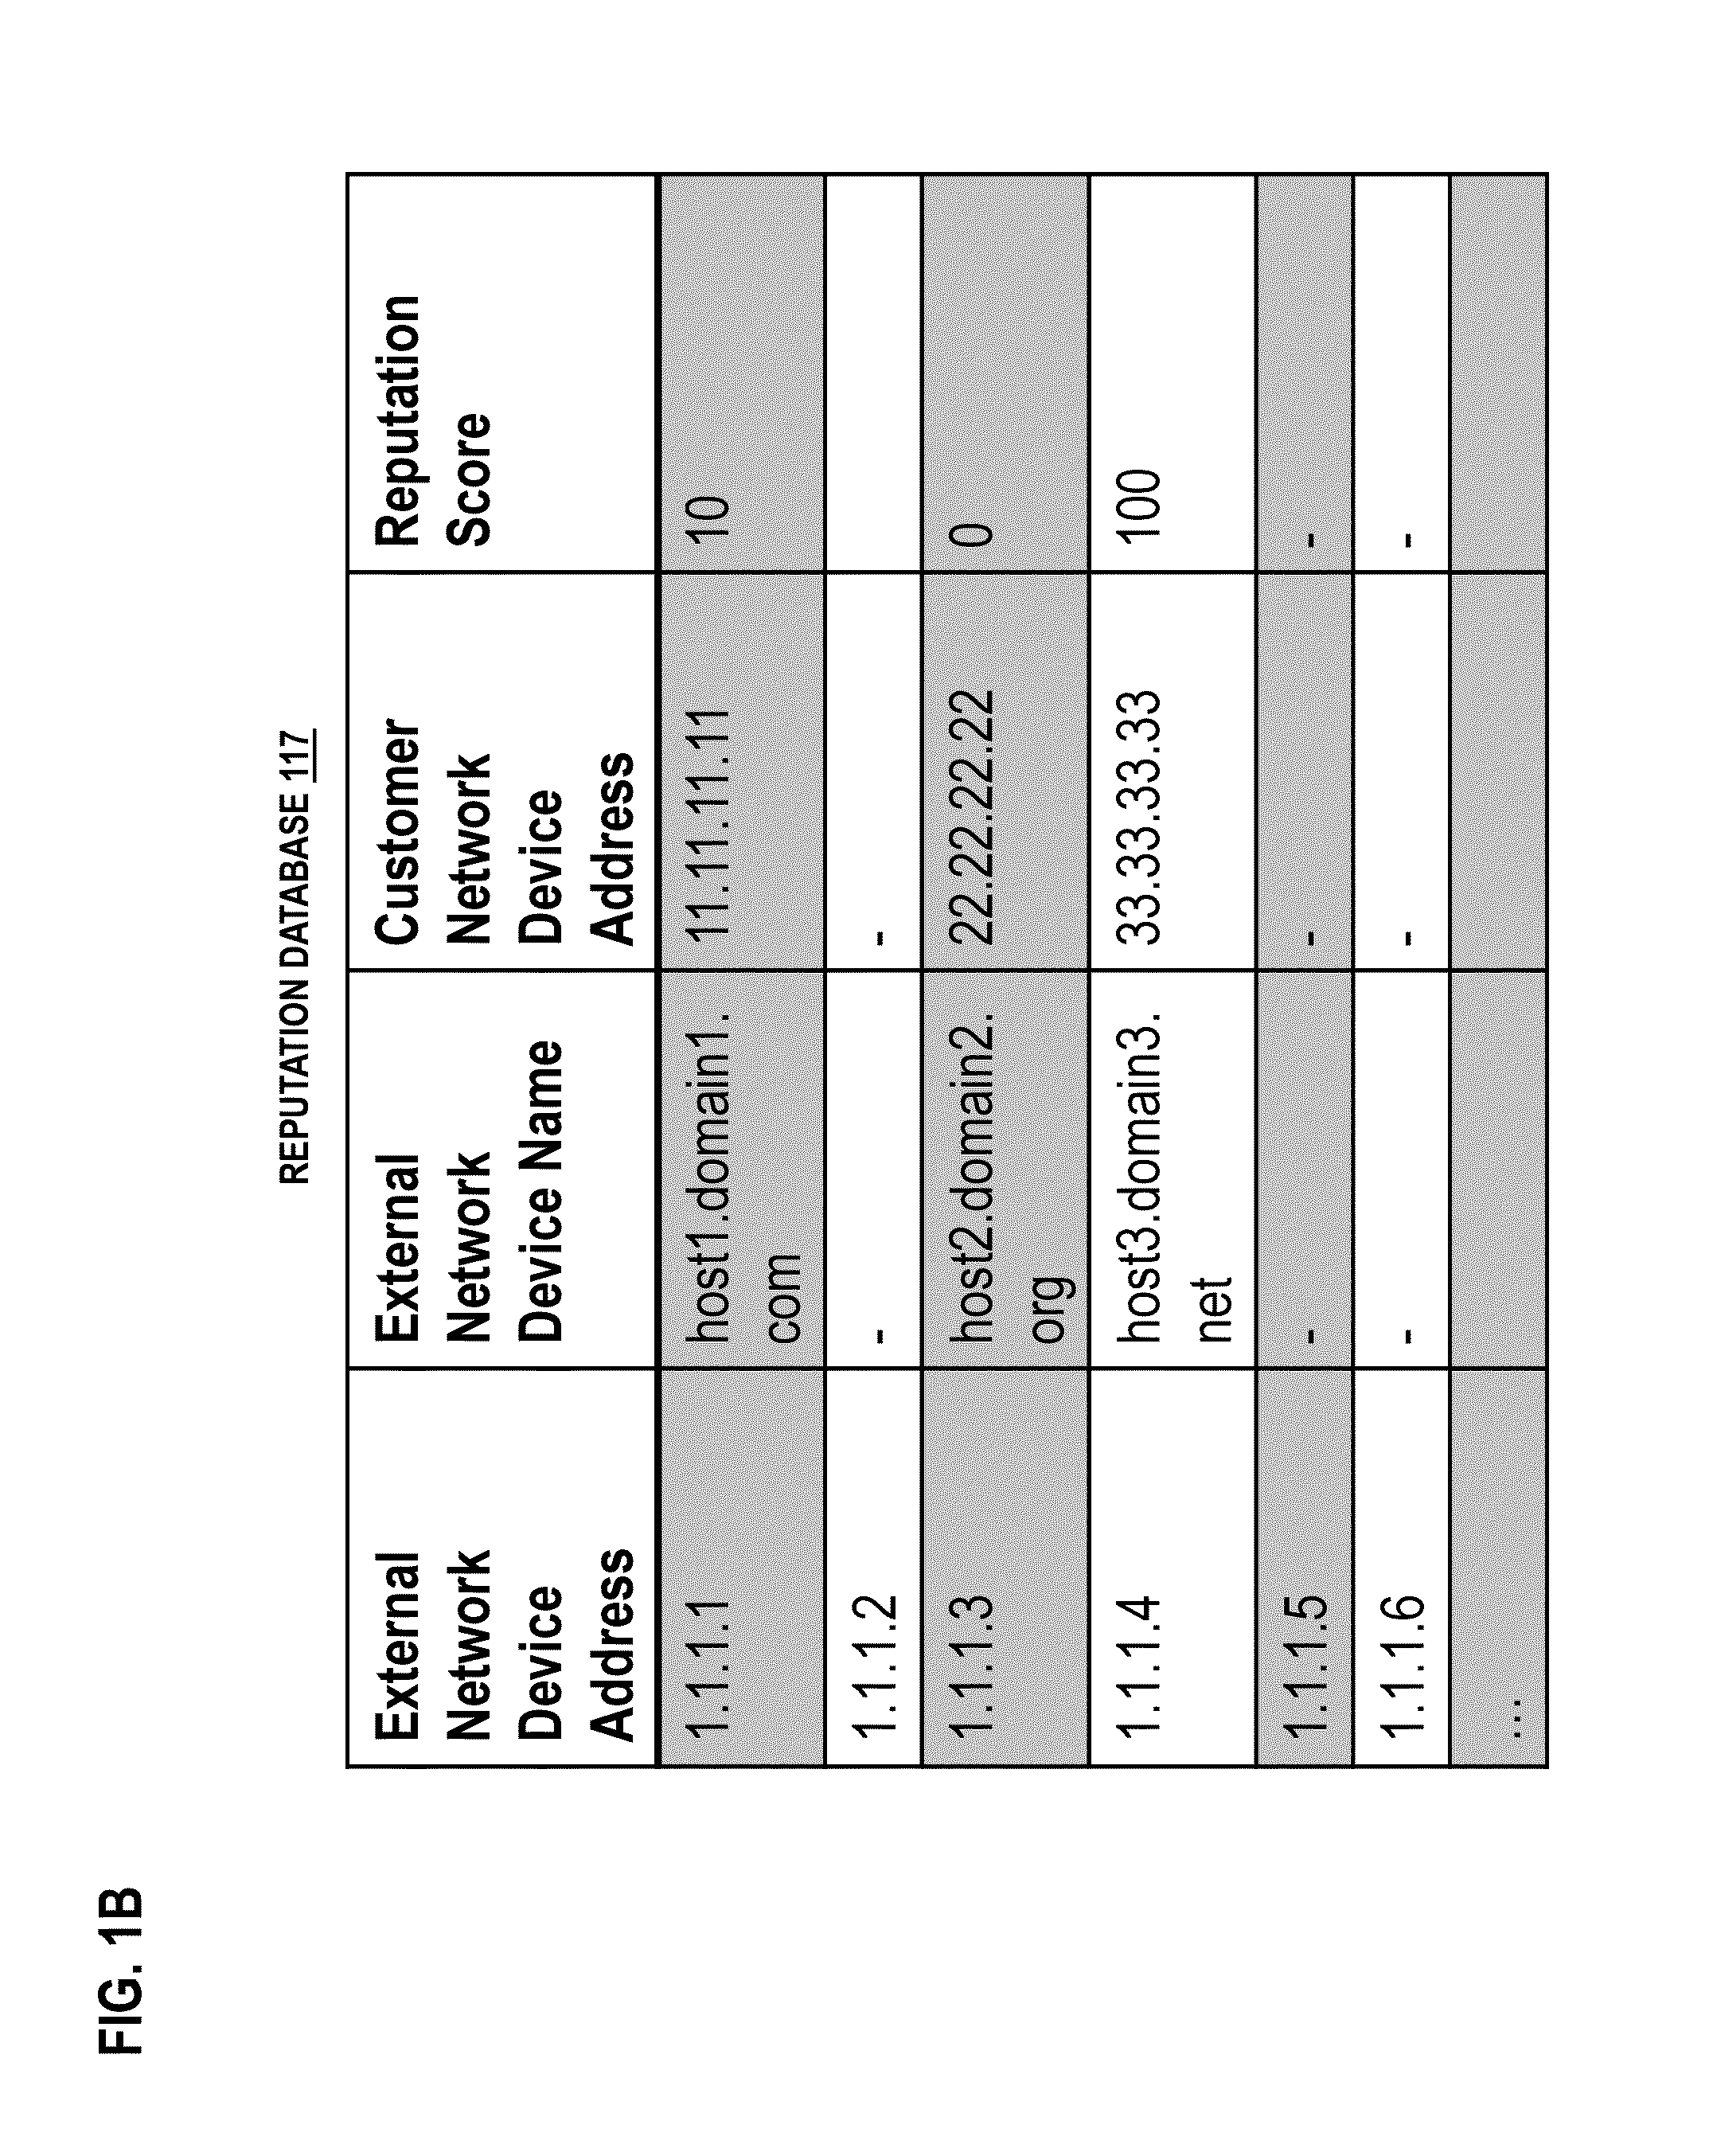 Method and apparatus for mitigating distributed denial of service attacks